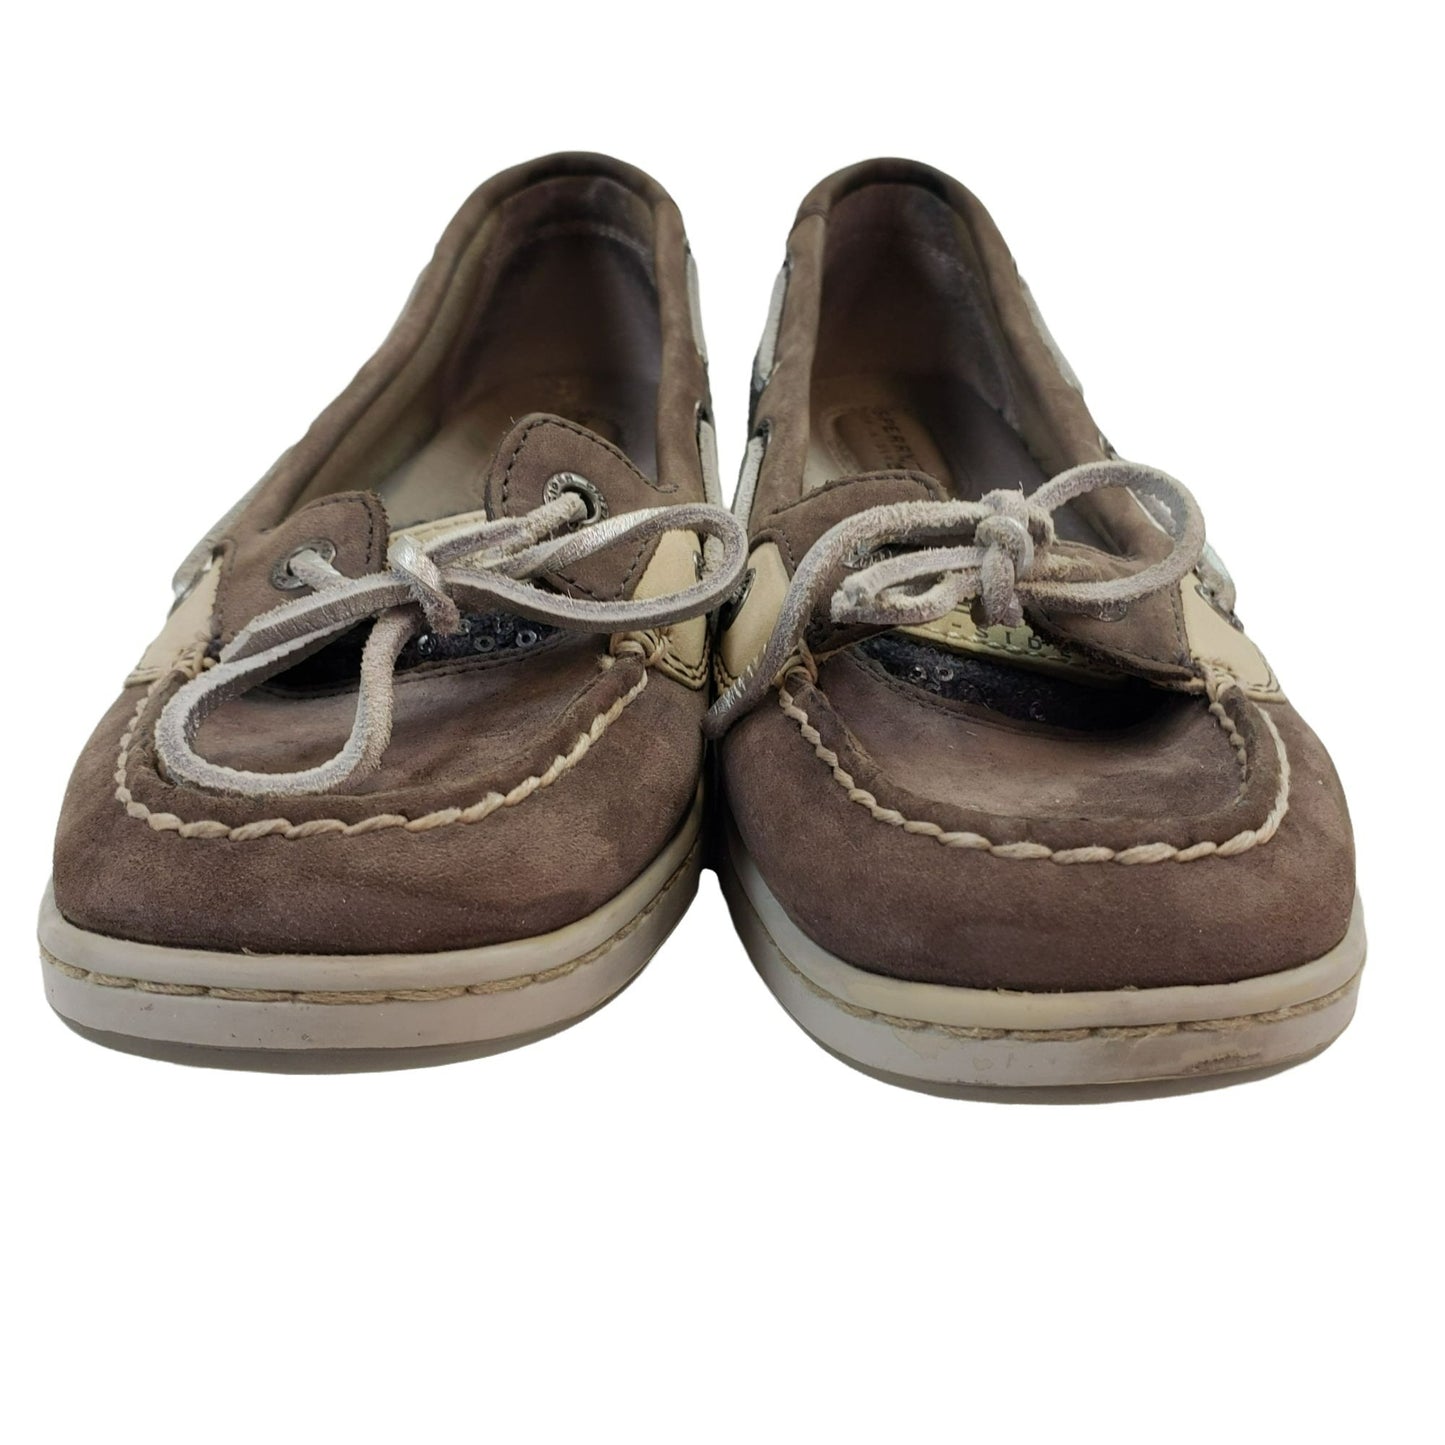 Sperry Top-Sider Firefish Leather Boat Shoes with Sequin Accents Size 8